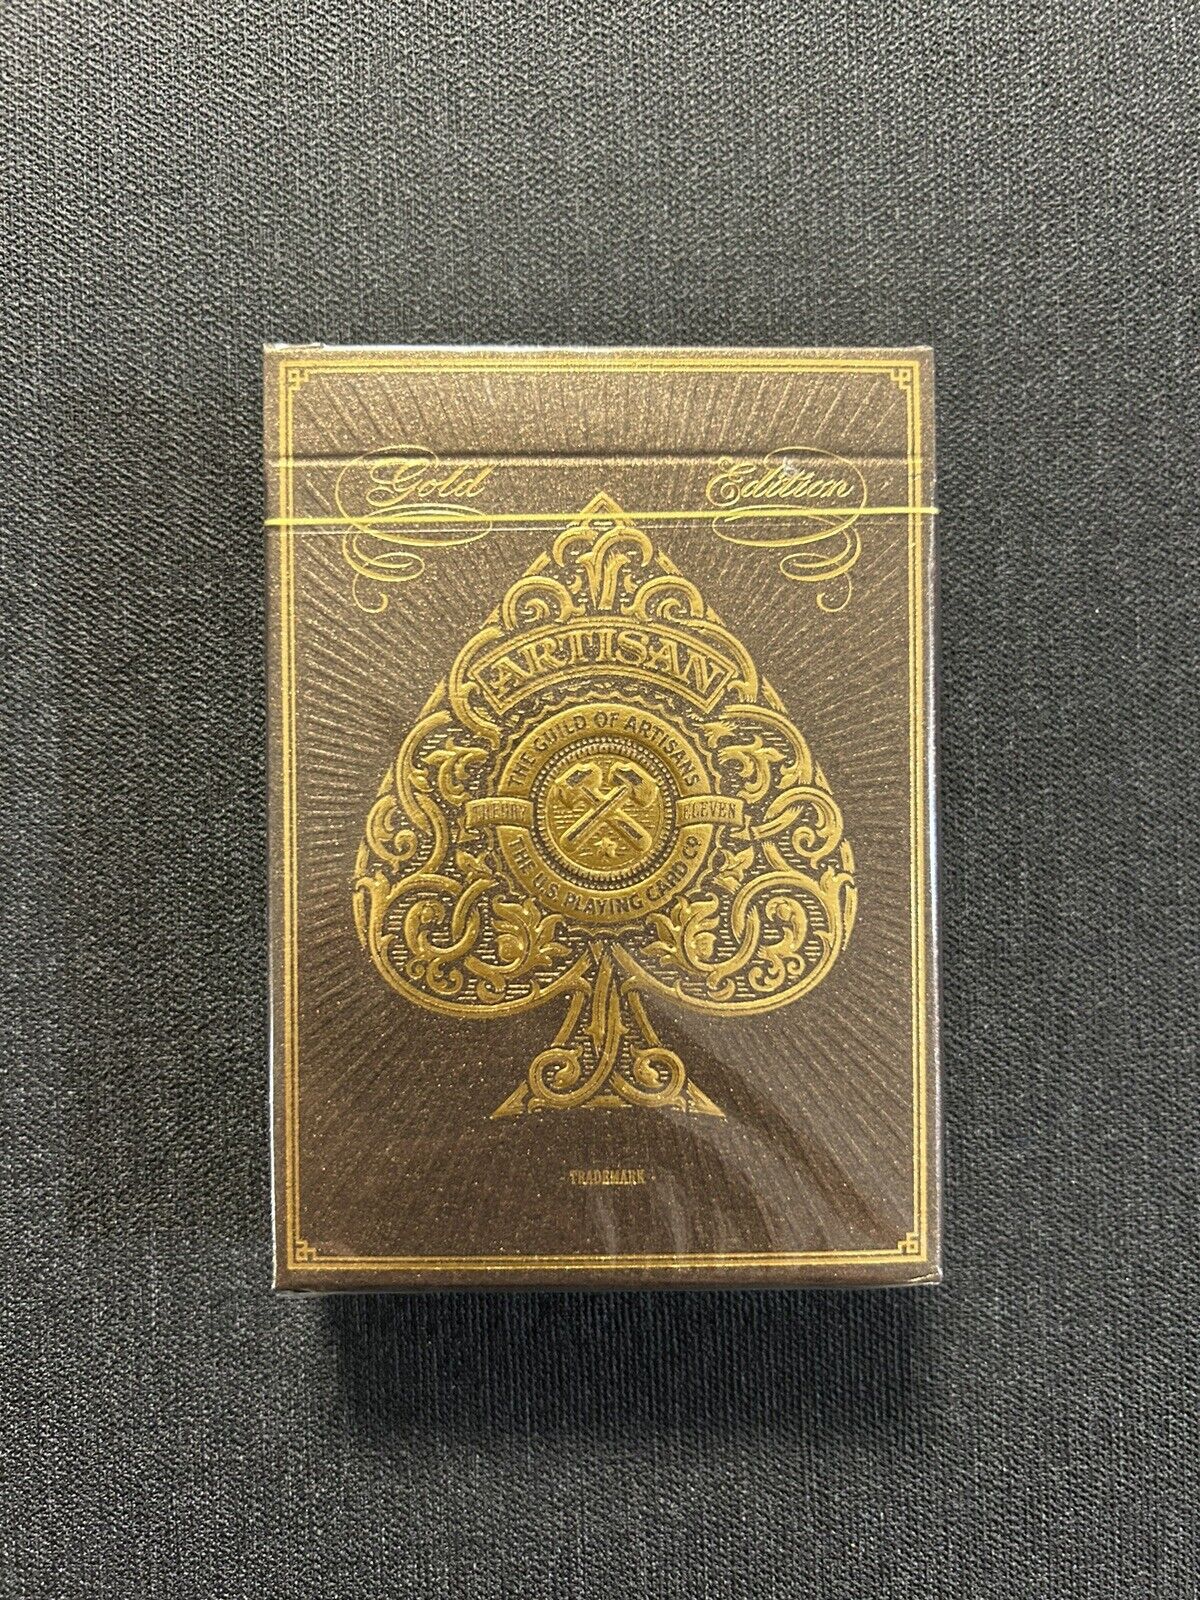 Gold Artisan Playing Cards - Theory 11  - Limited - 2019 Edition - New